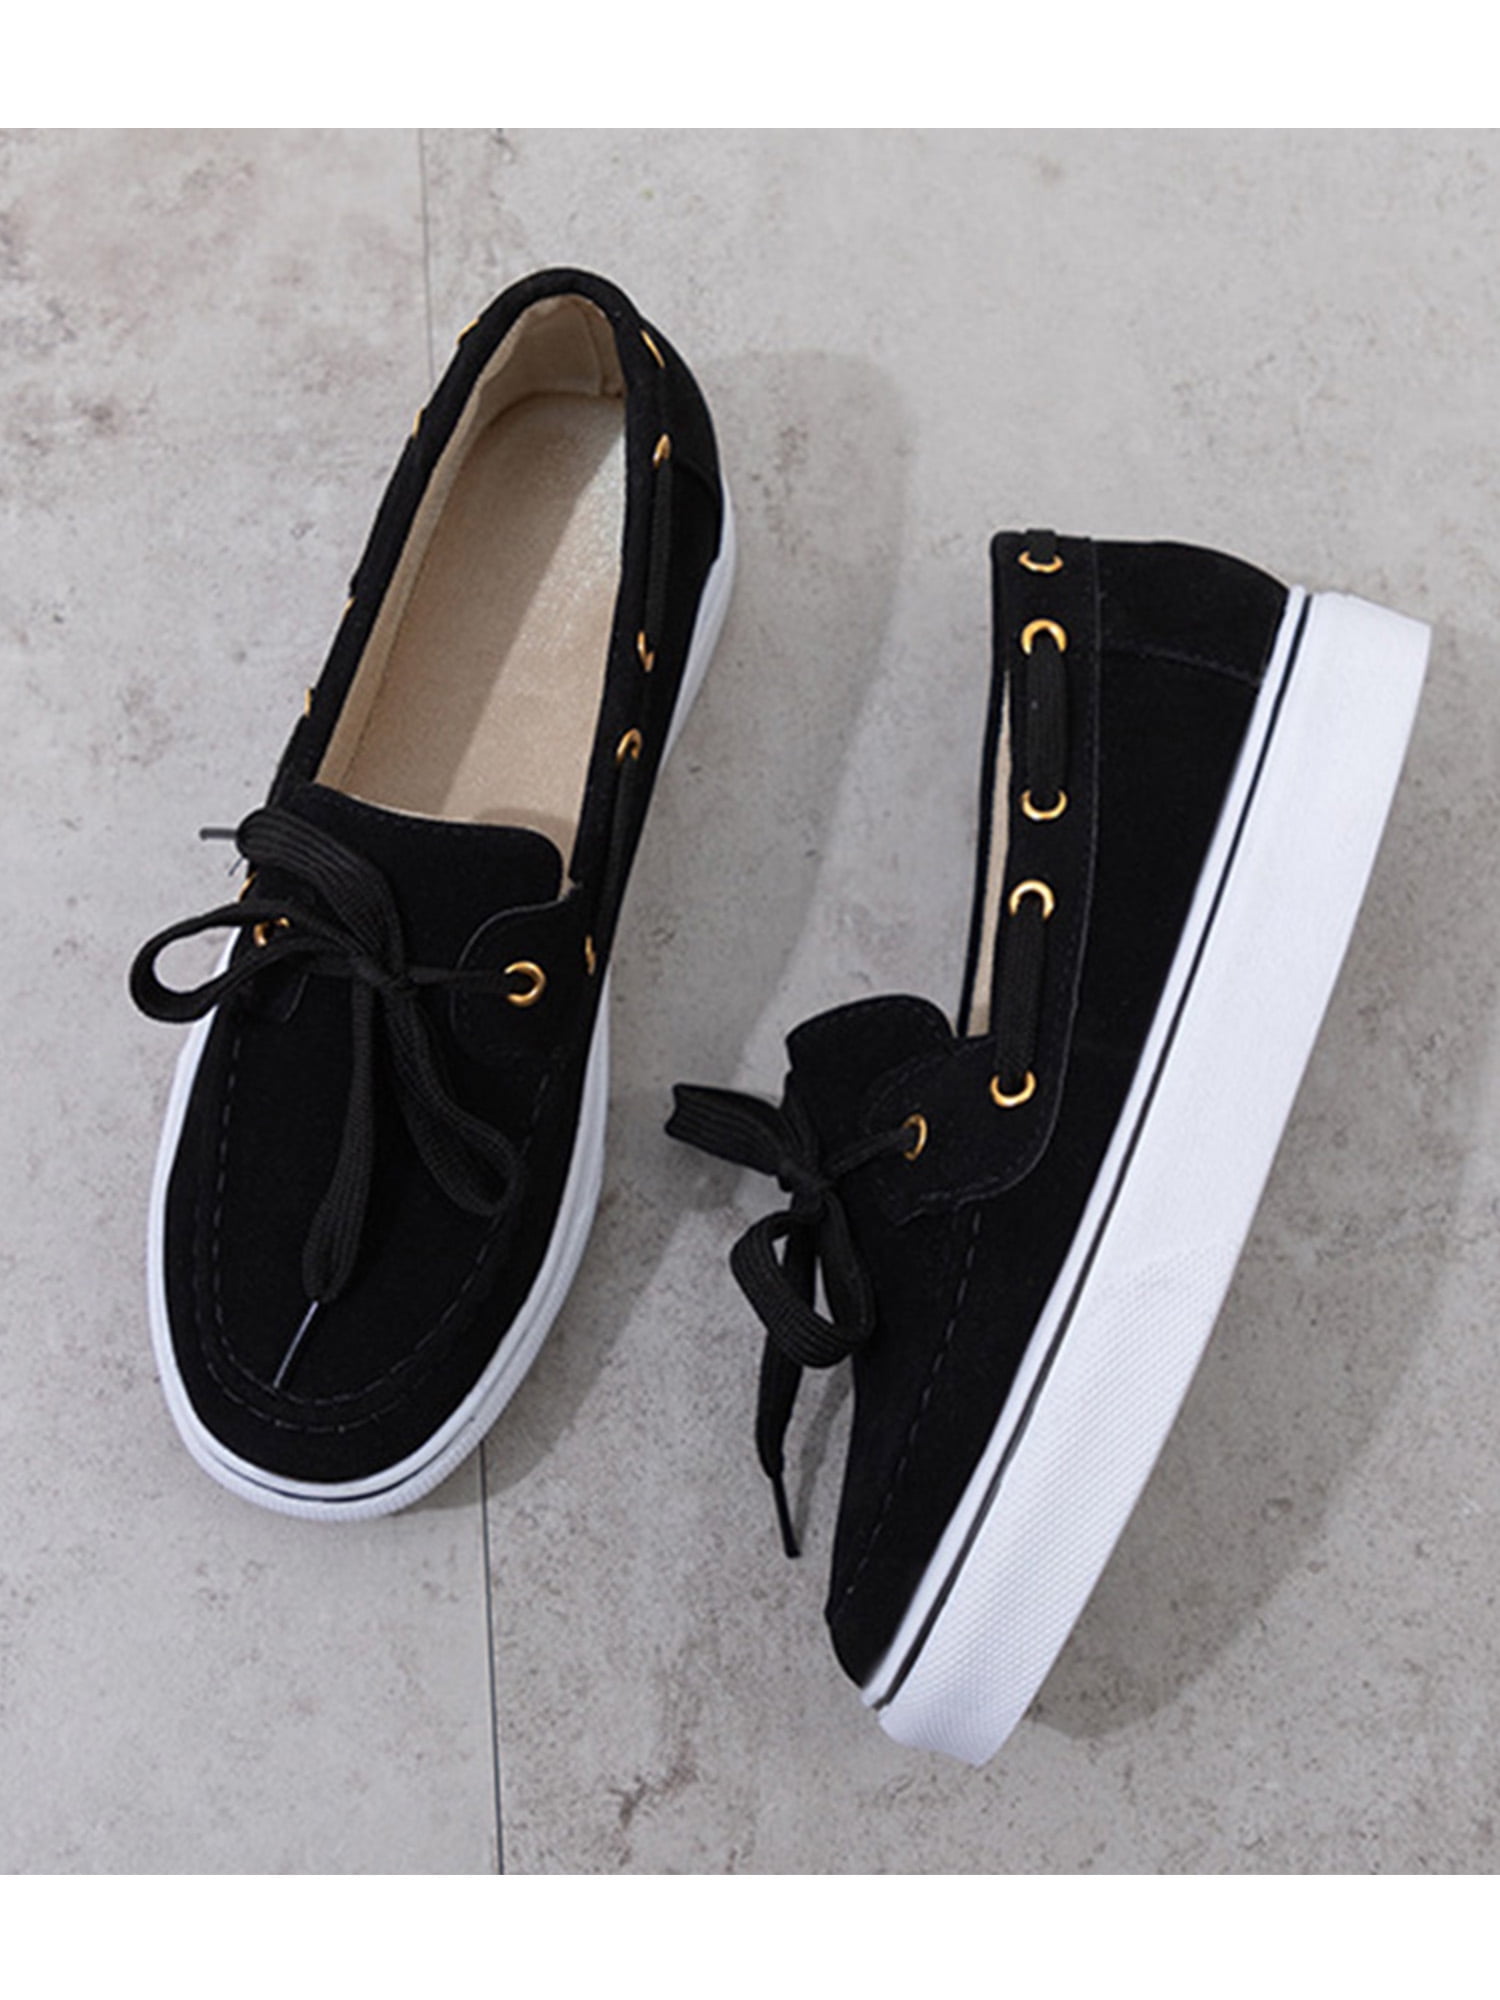 NEW WOMEN LADIES FLAT SLIP ON PLIMSOLL SNEAKERS TRAINERS SKATER SHOES PUMPS SIZE 